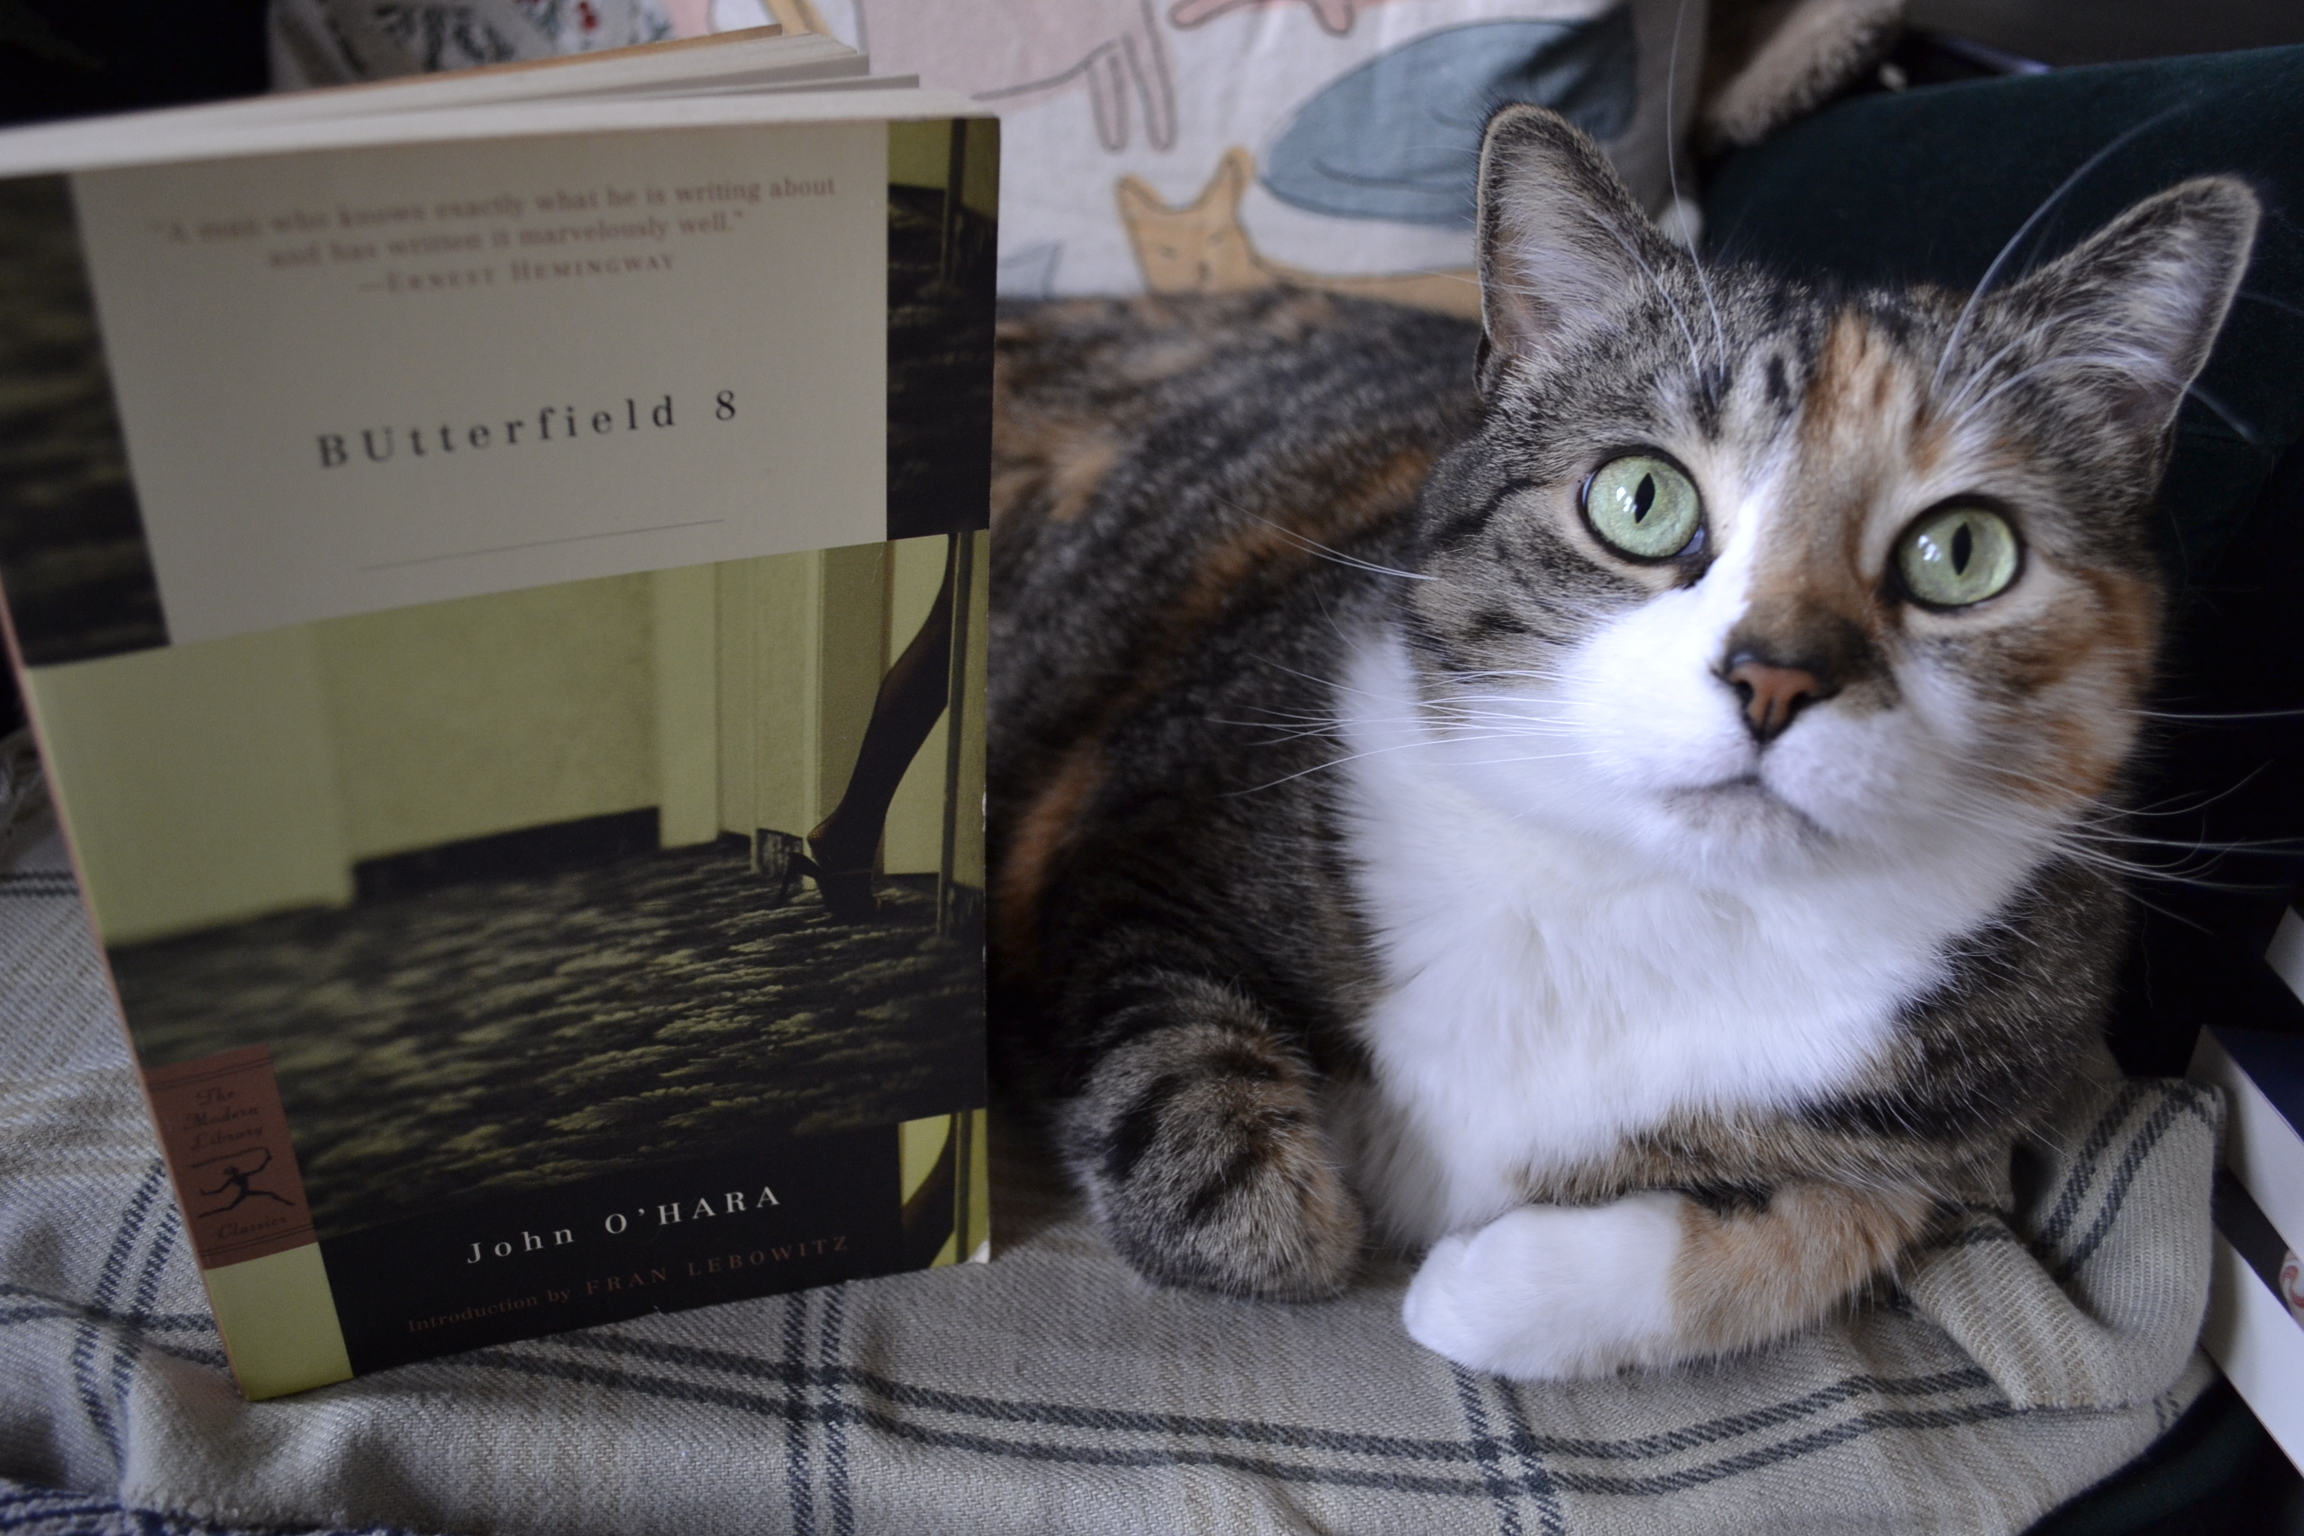 A calico tabby looks angelically up at the camera beside a copy of BUtterfield 8.